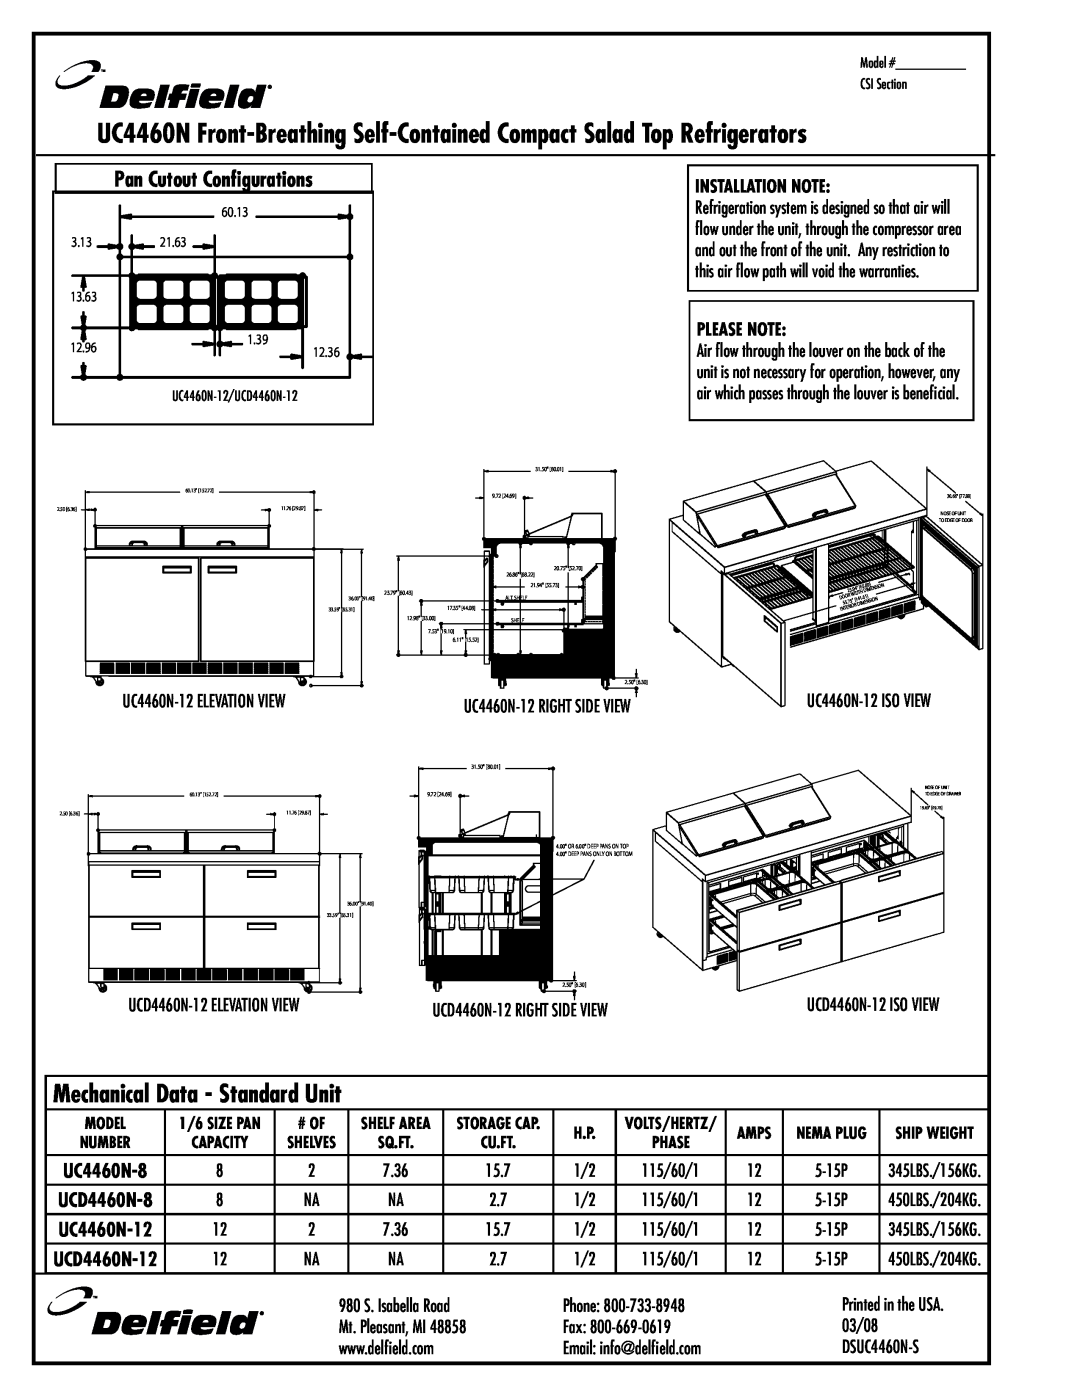 Delfield UC4460N-8, UCD4460N-8 Pan Cutout Configurations, Mechanical Data - Standard Unit, Installation Note, Please Note 